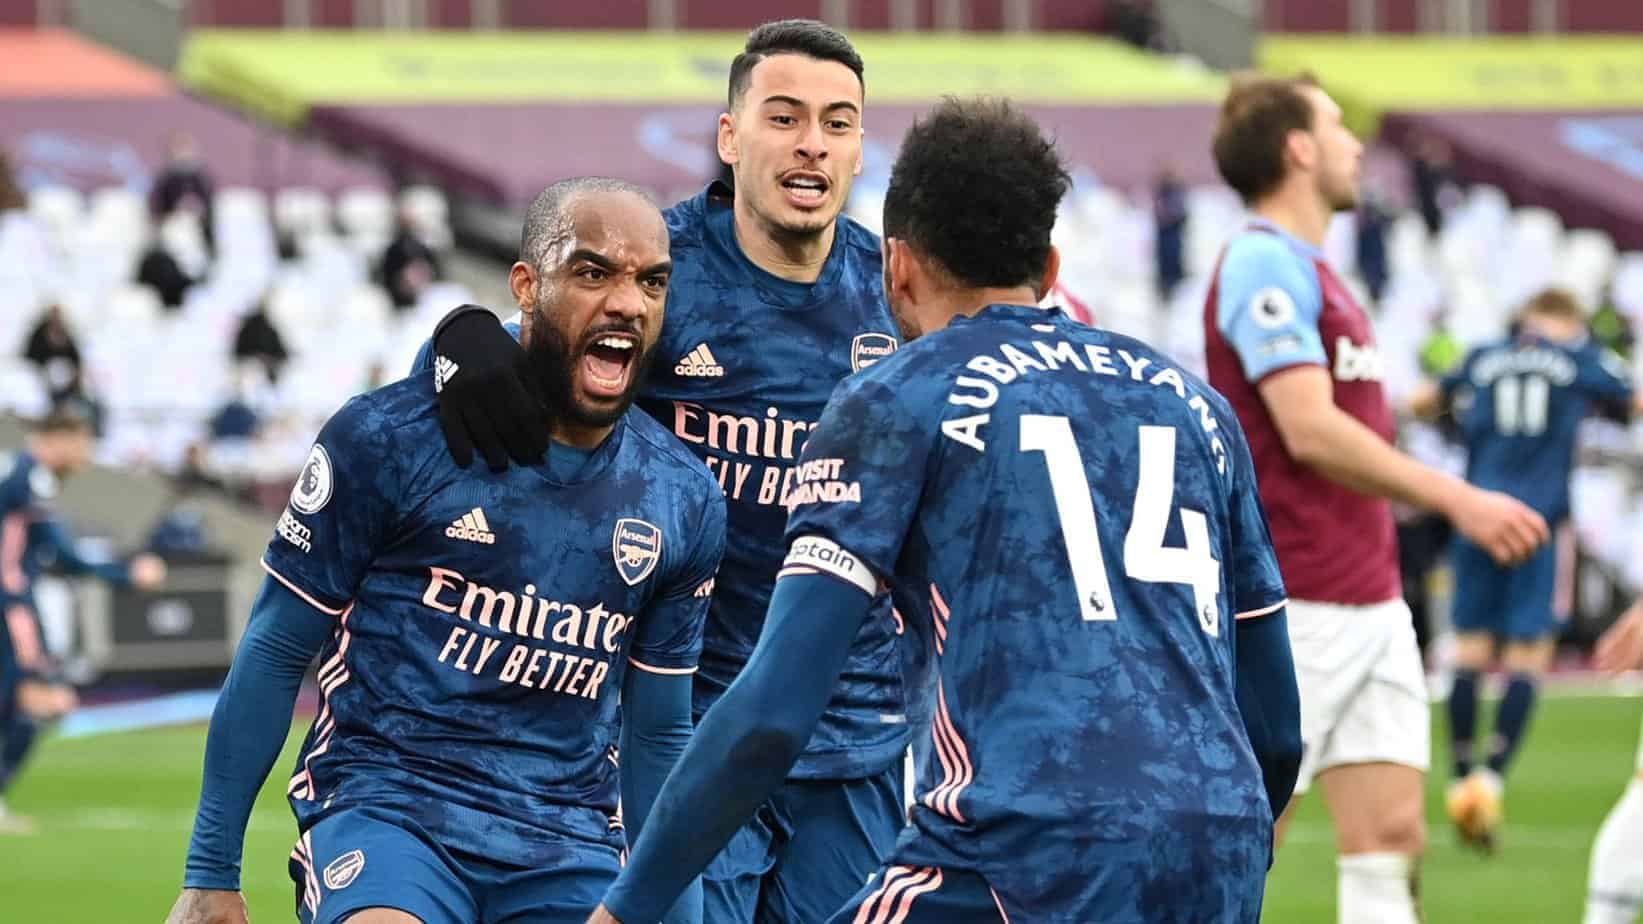 Arsenal vs. West Ham – Betting Odds and Free Pick